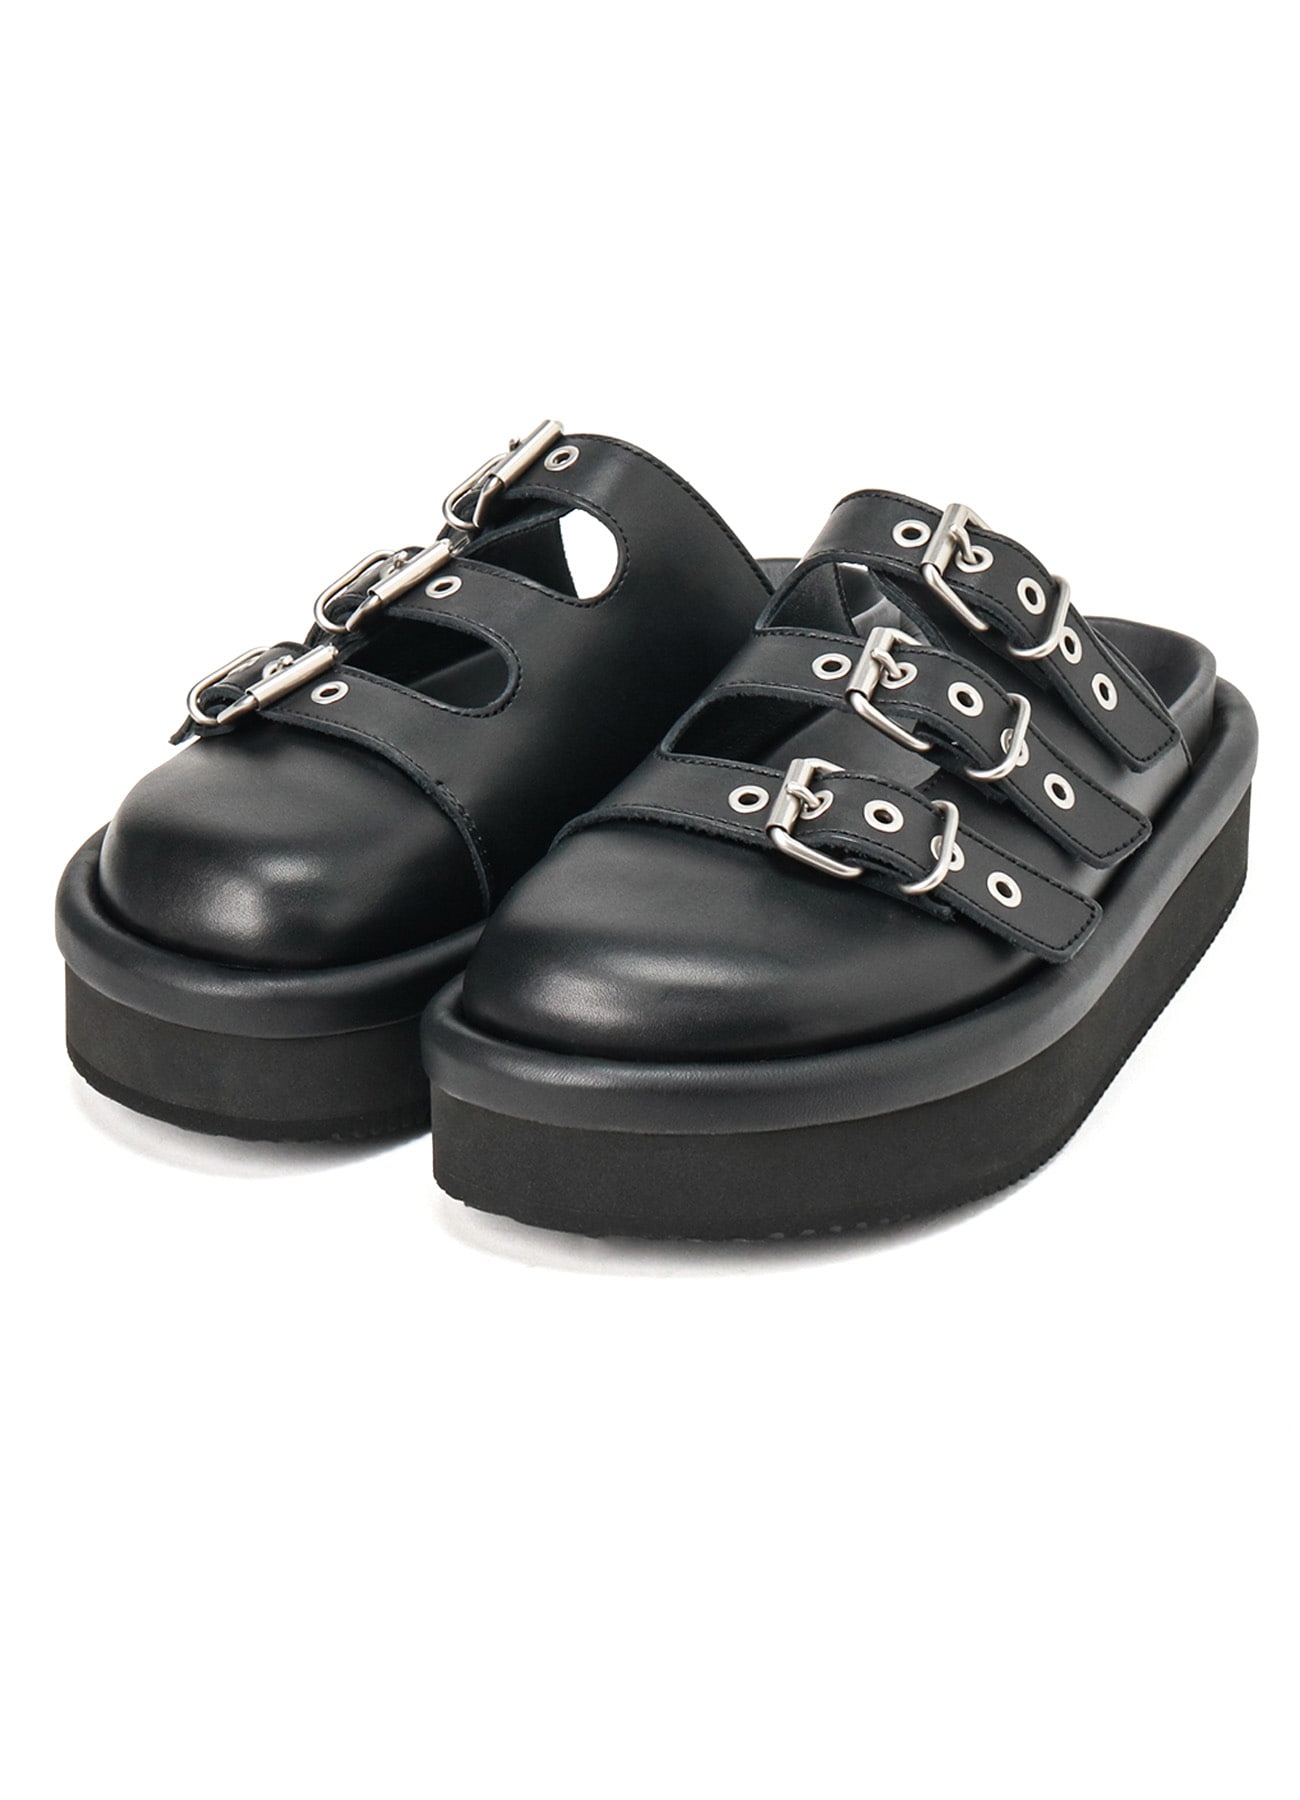 【7/17 12:00(JST) Release】COW LEATHER SANDAL